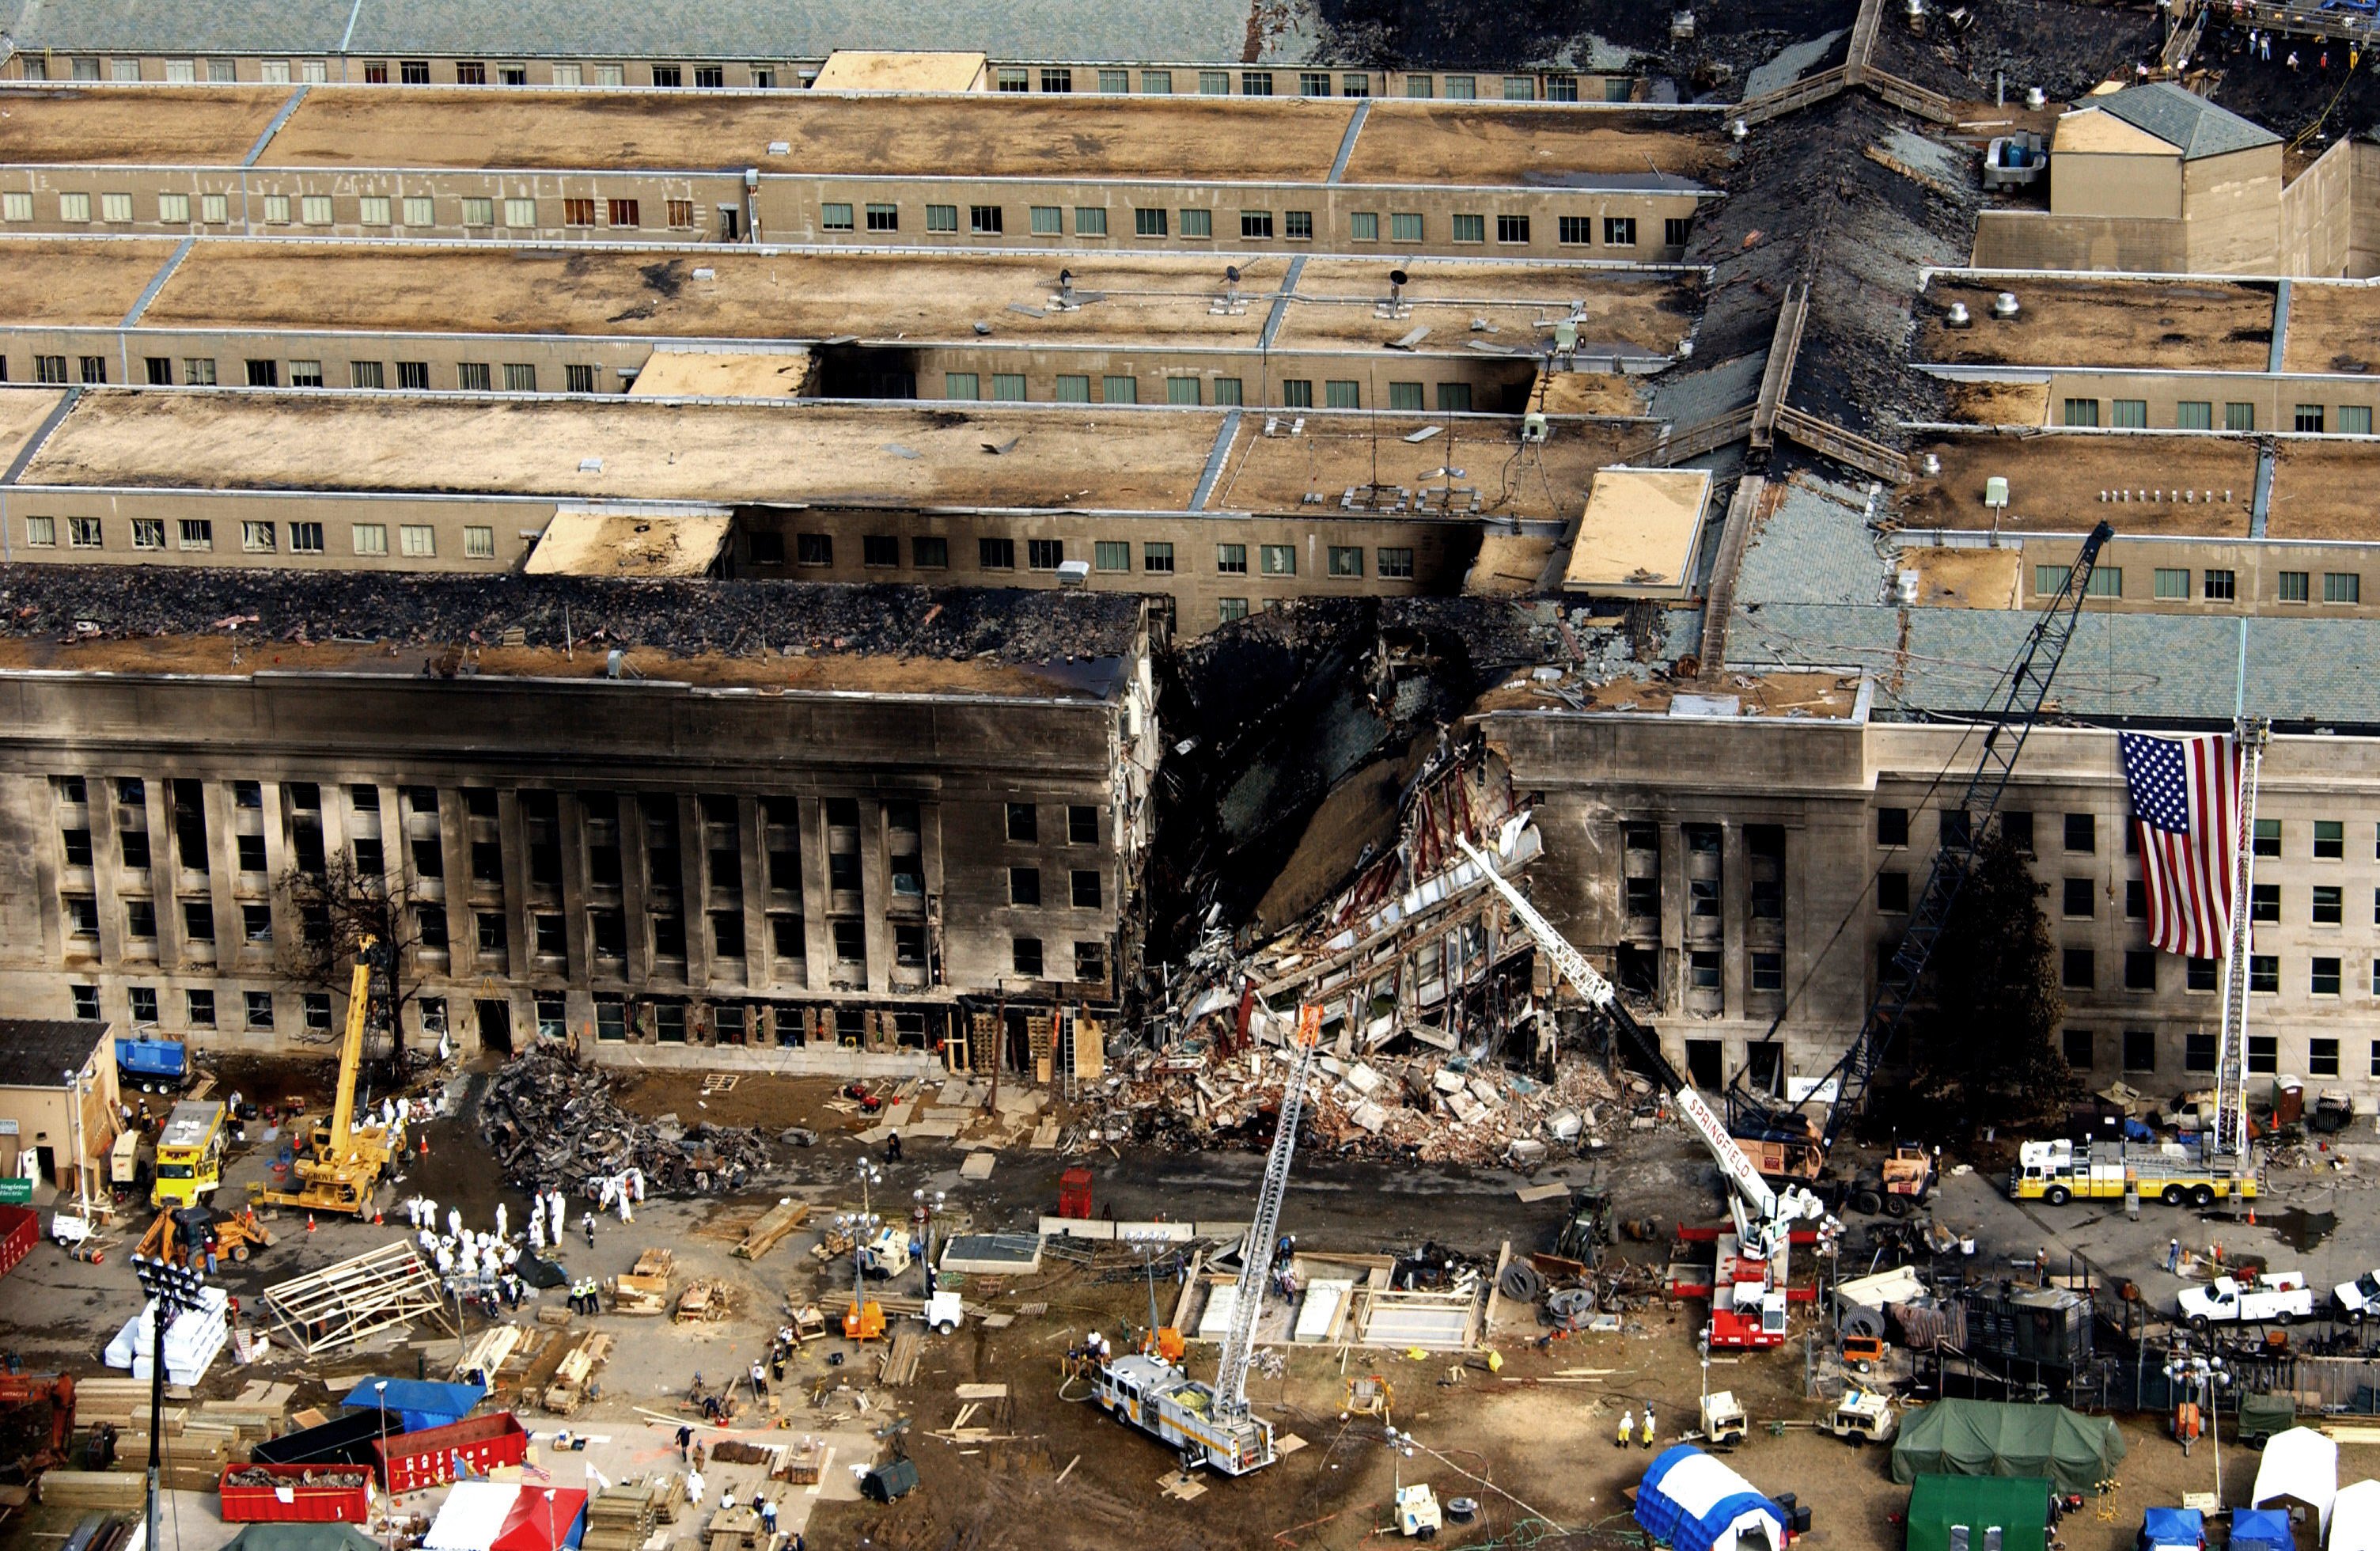 Aerial view of the Pentagon Building located in Arlington, Virginia during the 9/11 terrorists attacks.| Photo: WikiMedia